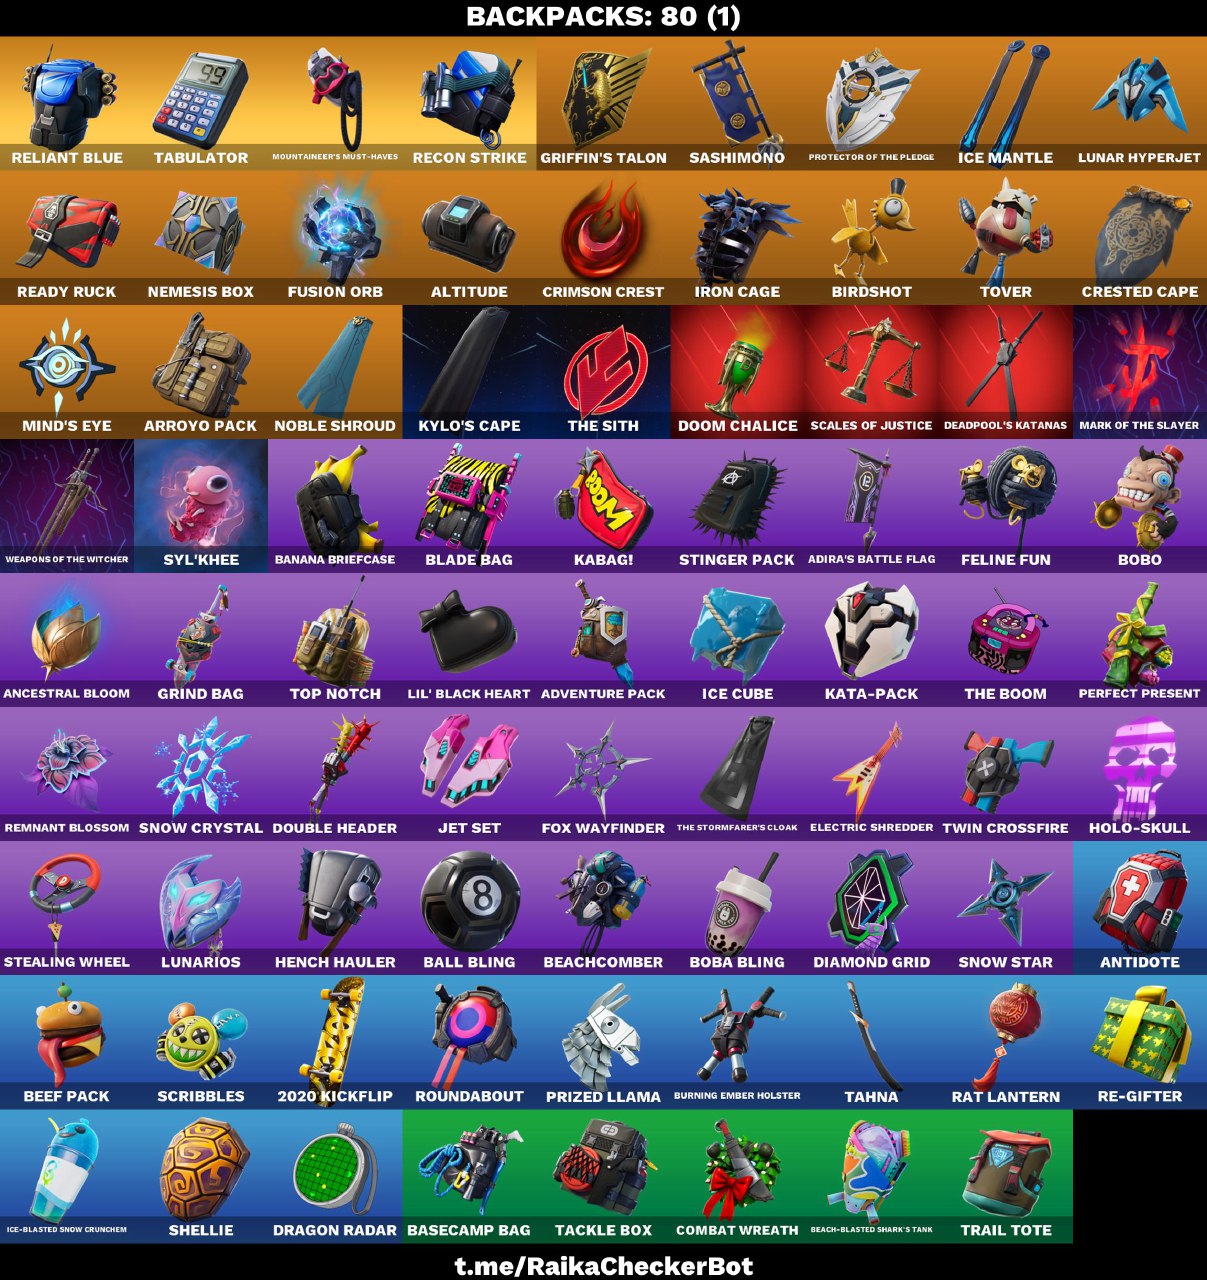 FA | 72 OUTFITS | BLUE TEAM LEADER | BLIZZARD BOMBER | PRODIGY | TRILOGY | POINT PATROLLER | RELIANT BLUE | TABULATOR | FADE